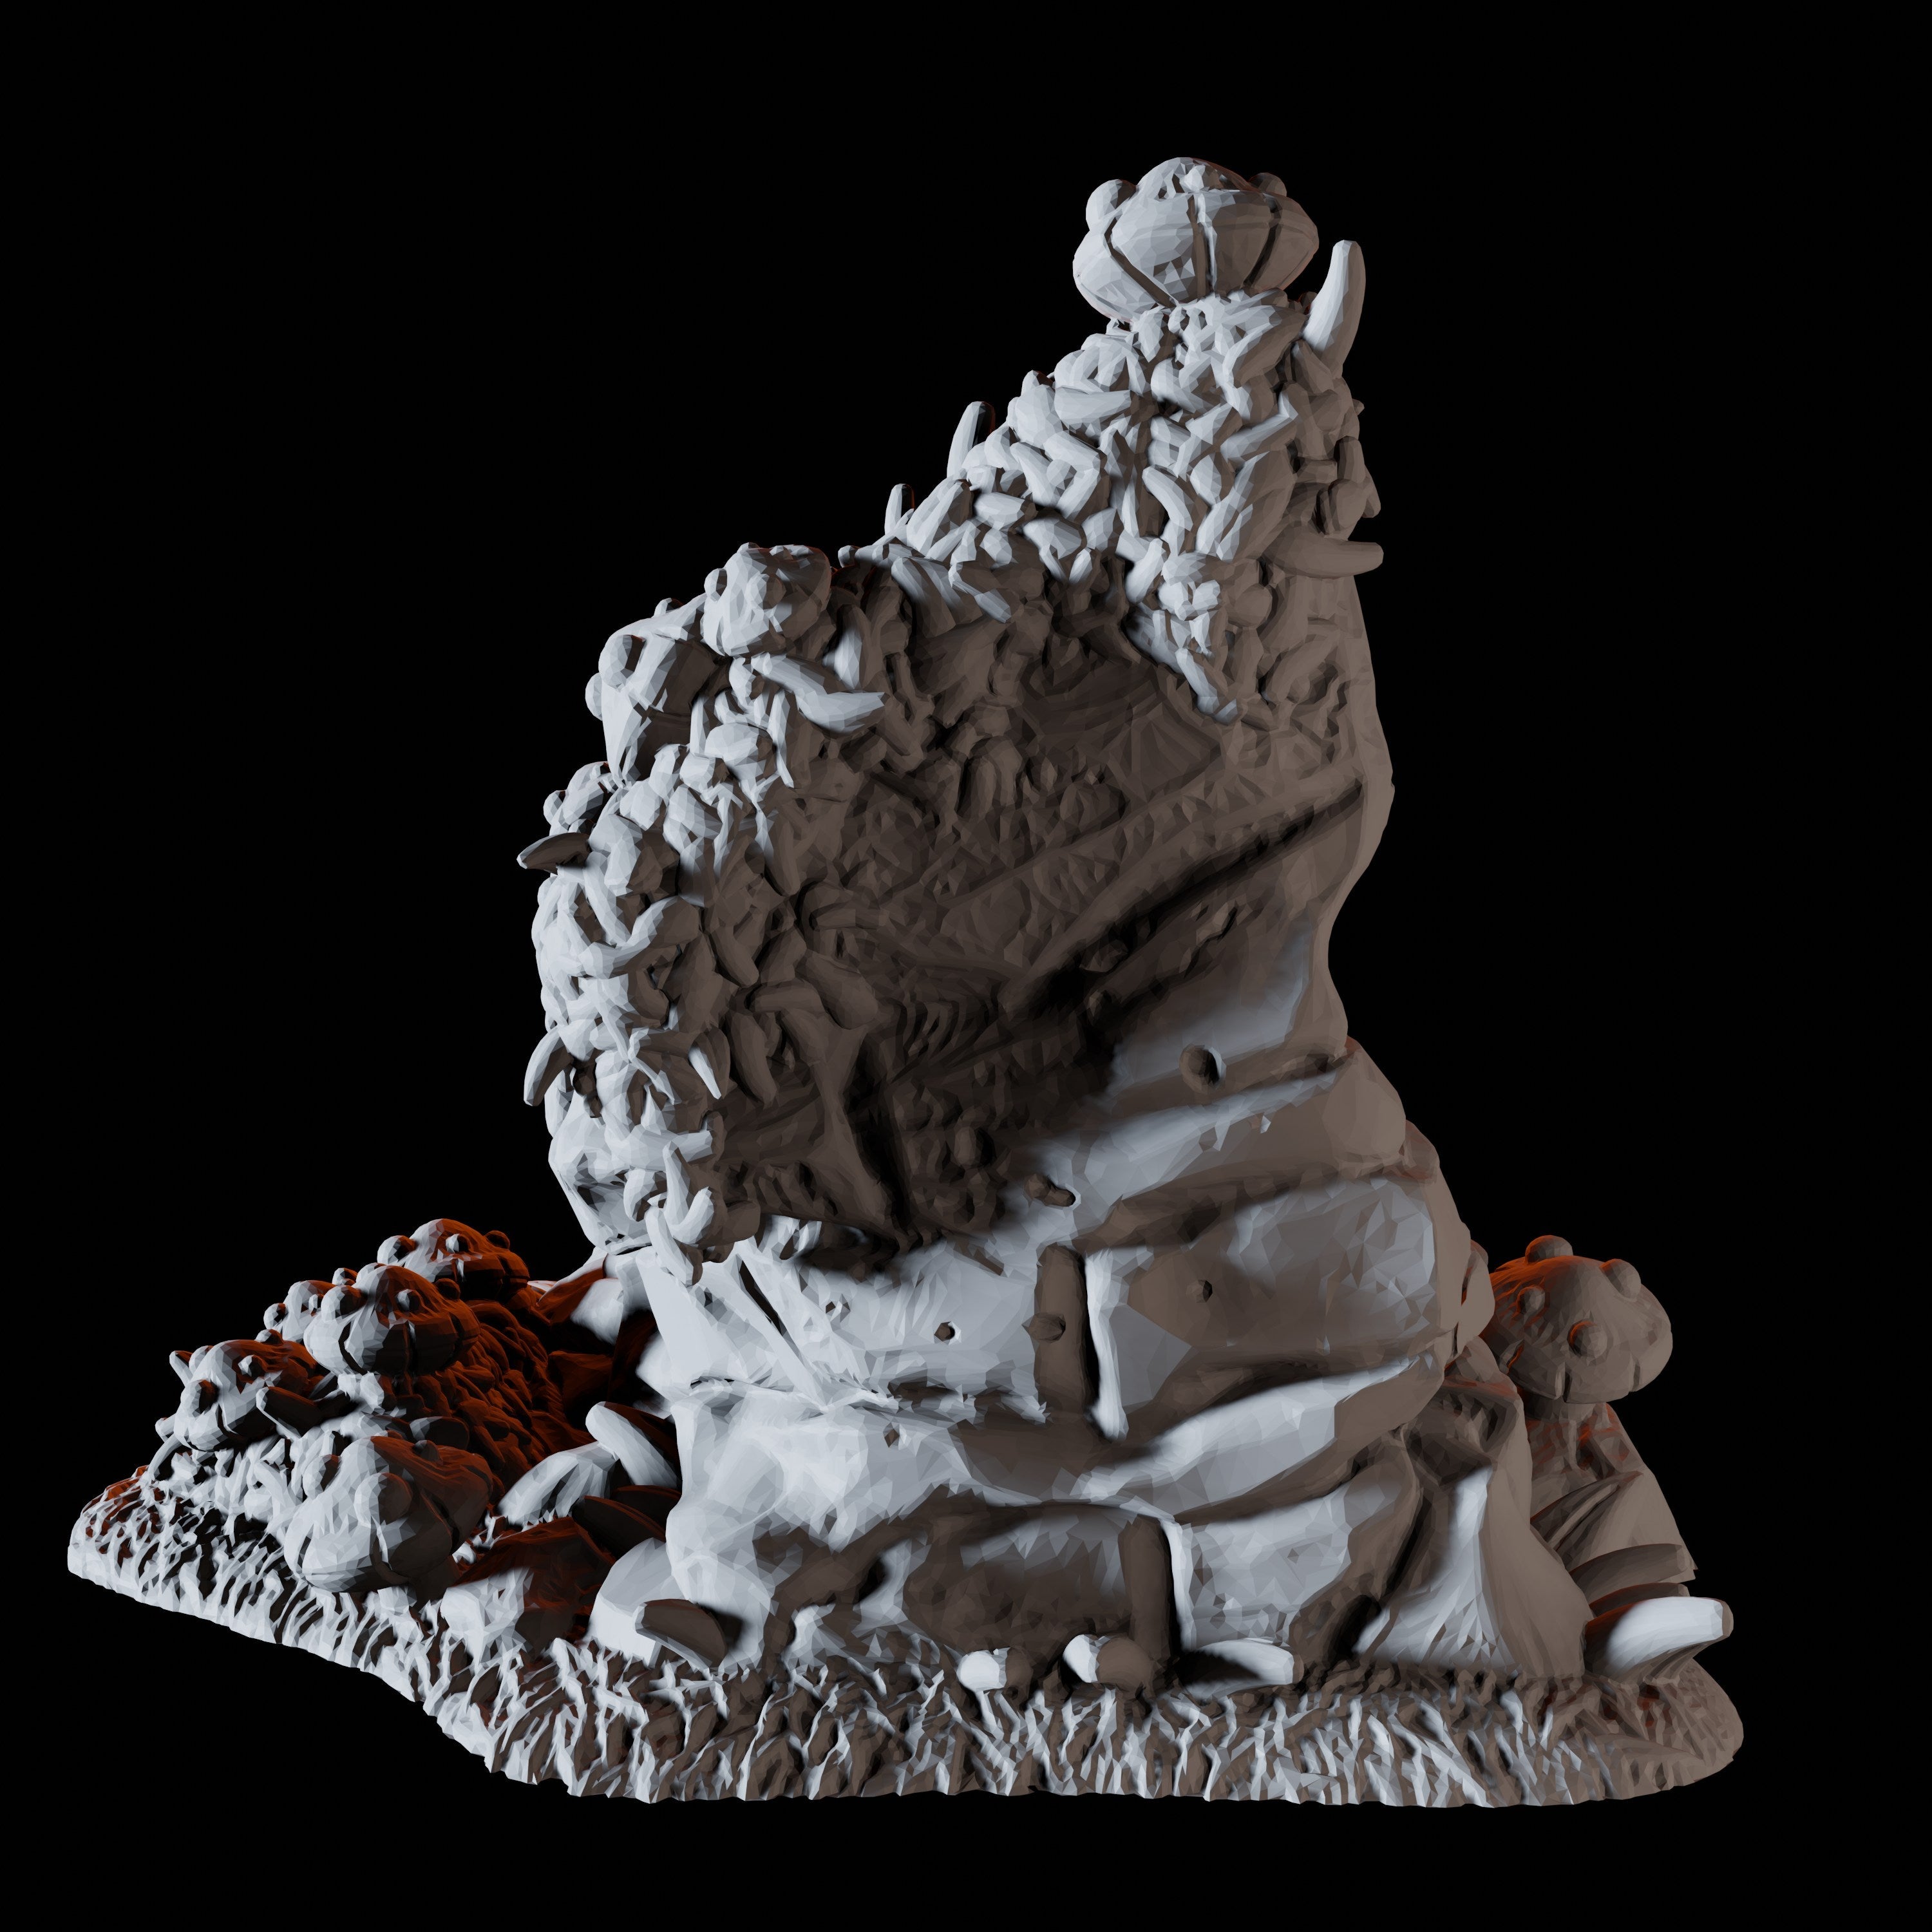 15 Underdark Scatter Terrain Pieces Miniature for Dungeons and Dragons, Pathfinder or other TTRPGs